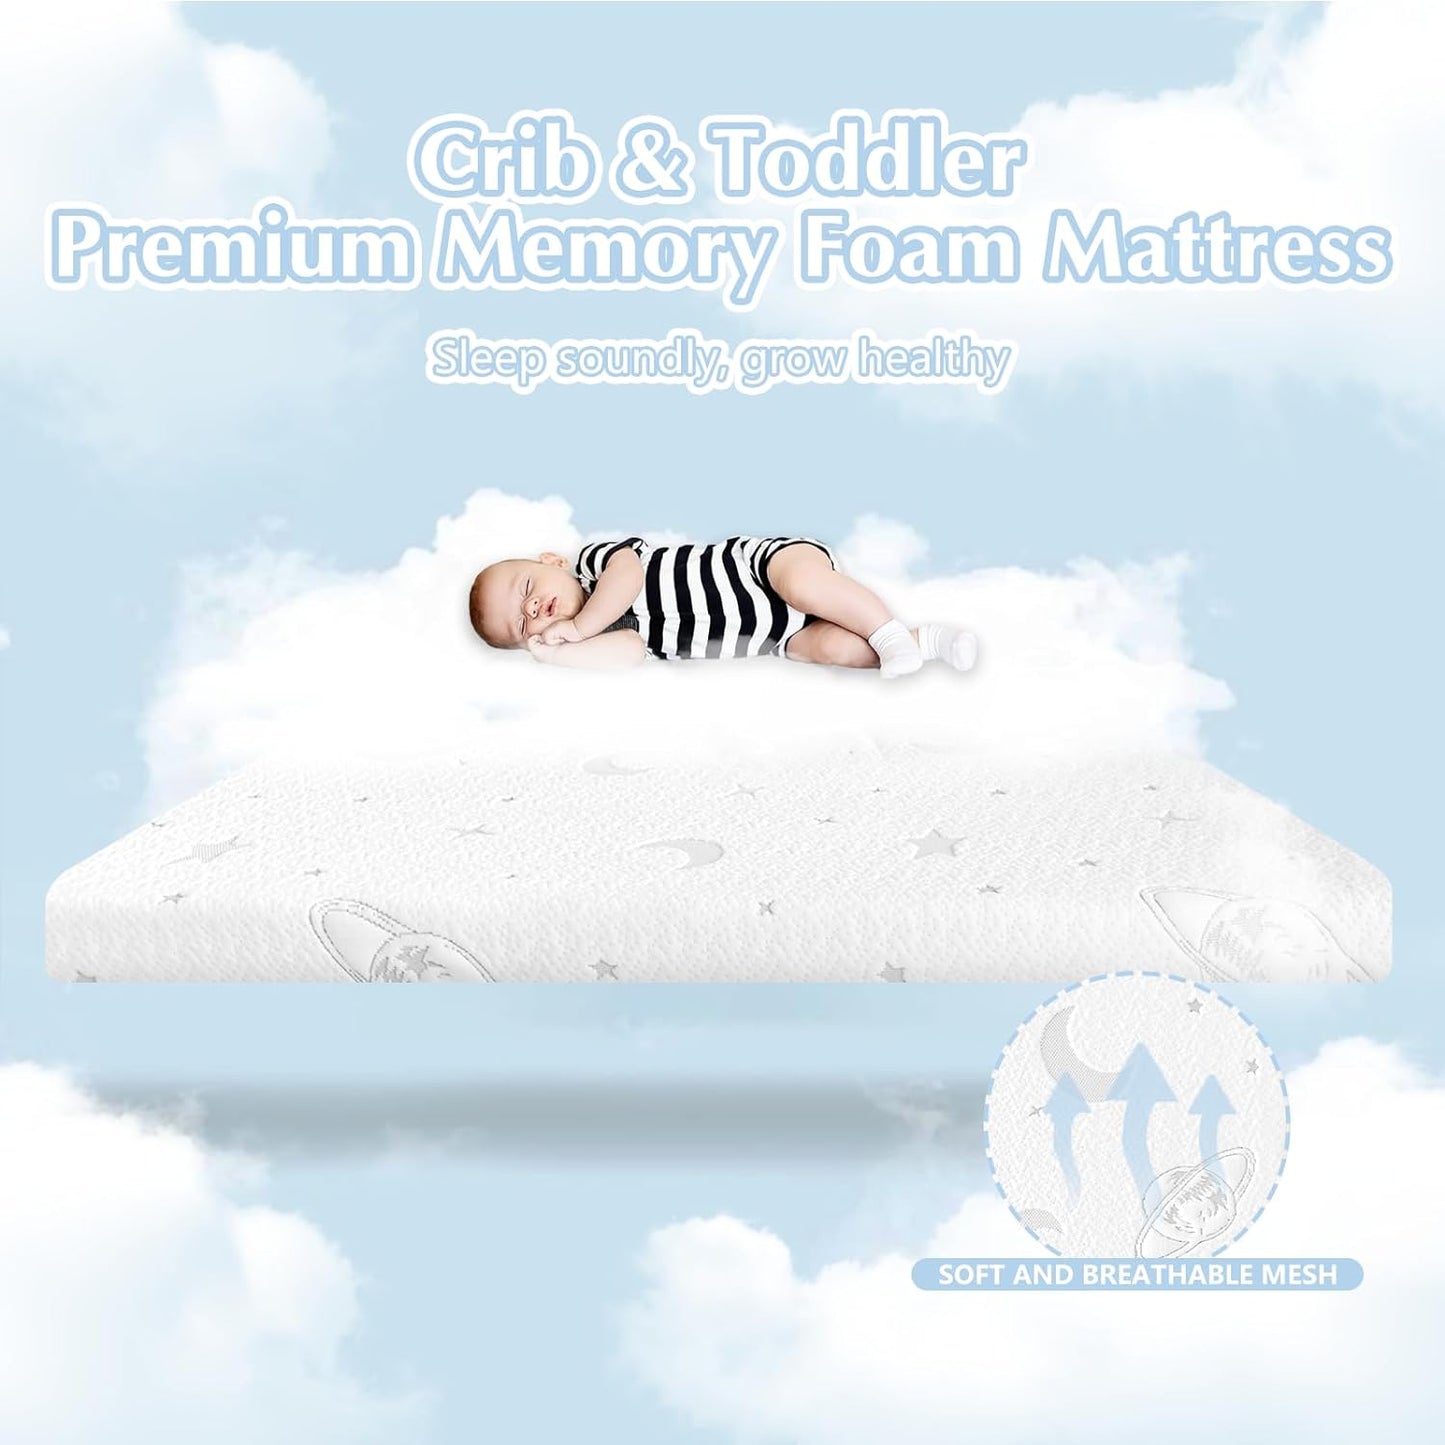 Pack and Play Mattress Pad, Memory Foam Pack N Play Mattresses for Baby and Toddler, 38X26 Portable Travel Crib Mattress with Soft Removable Jacquard Cover